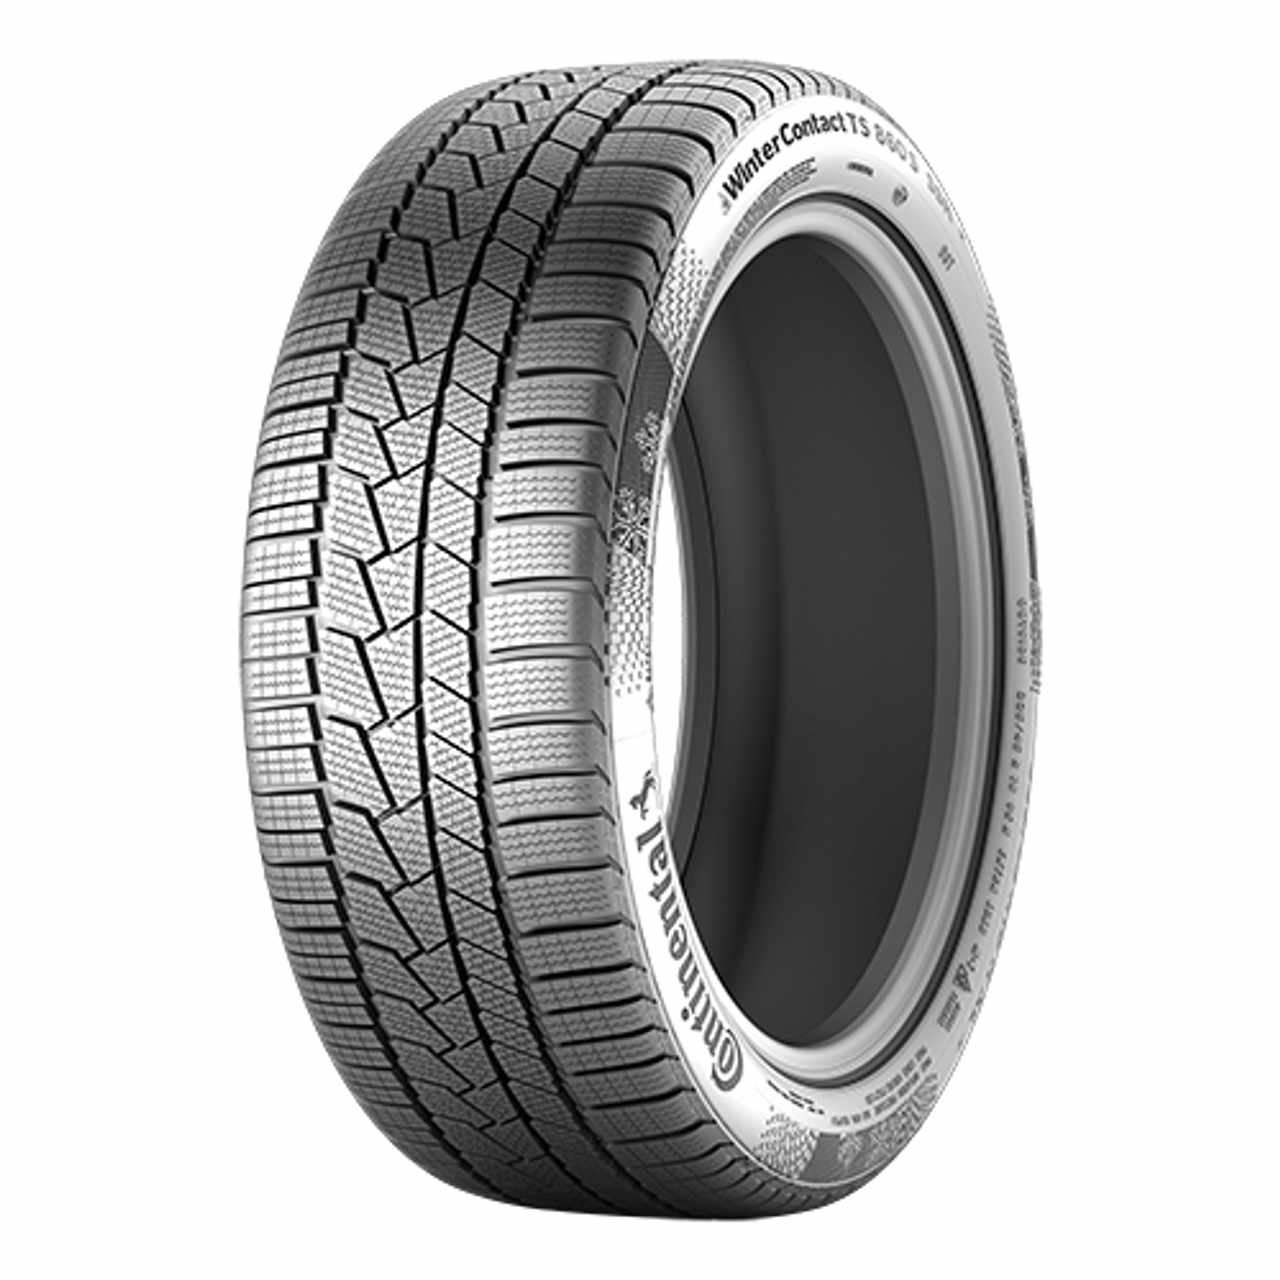 CONTINENTAL WINTERCONTACT TS 860 S (*) SSR 205/55R16 91H BSW